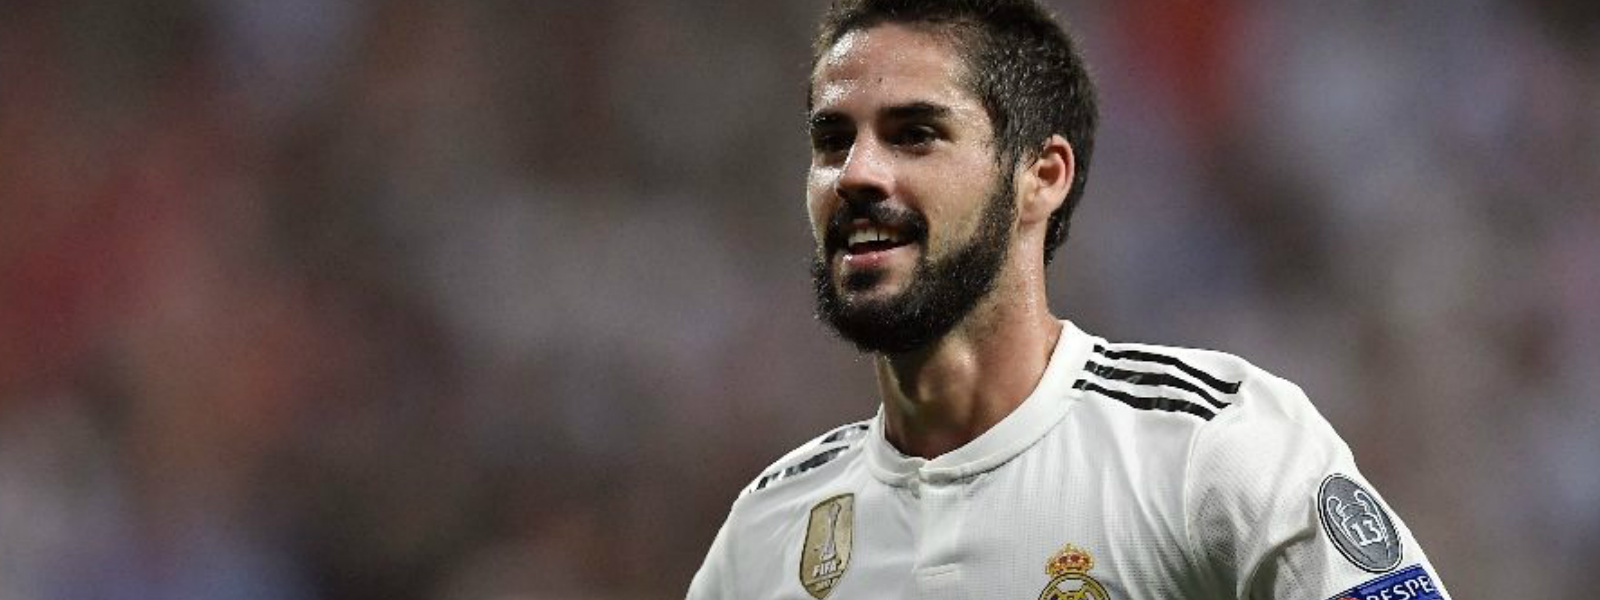 Isco's future, a cloud over Real Madrid